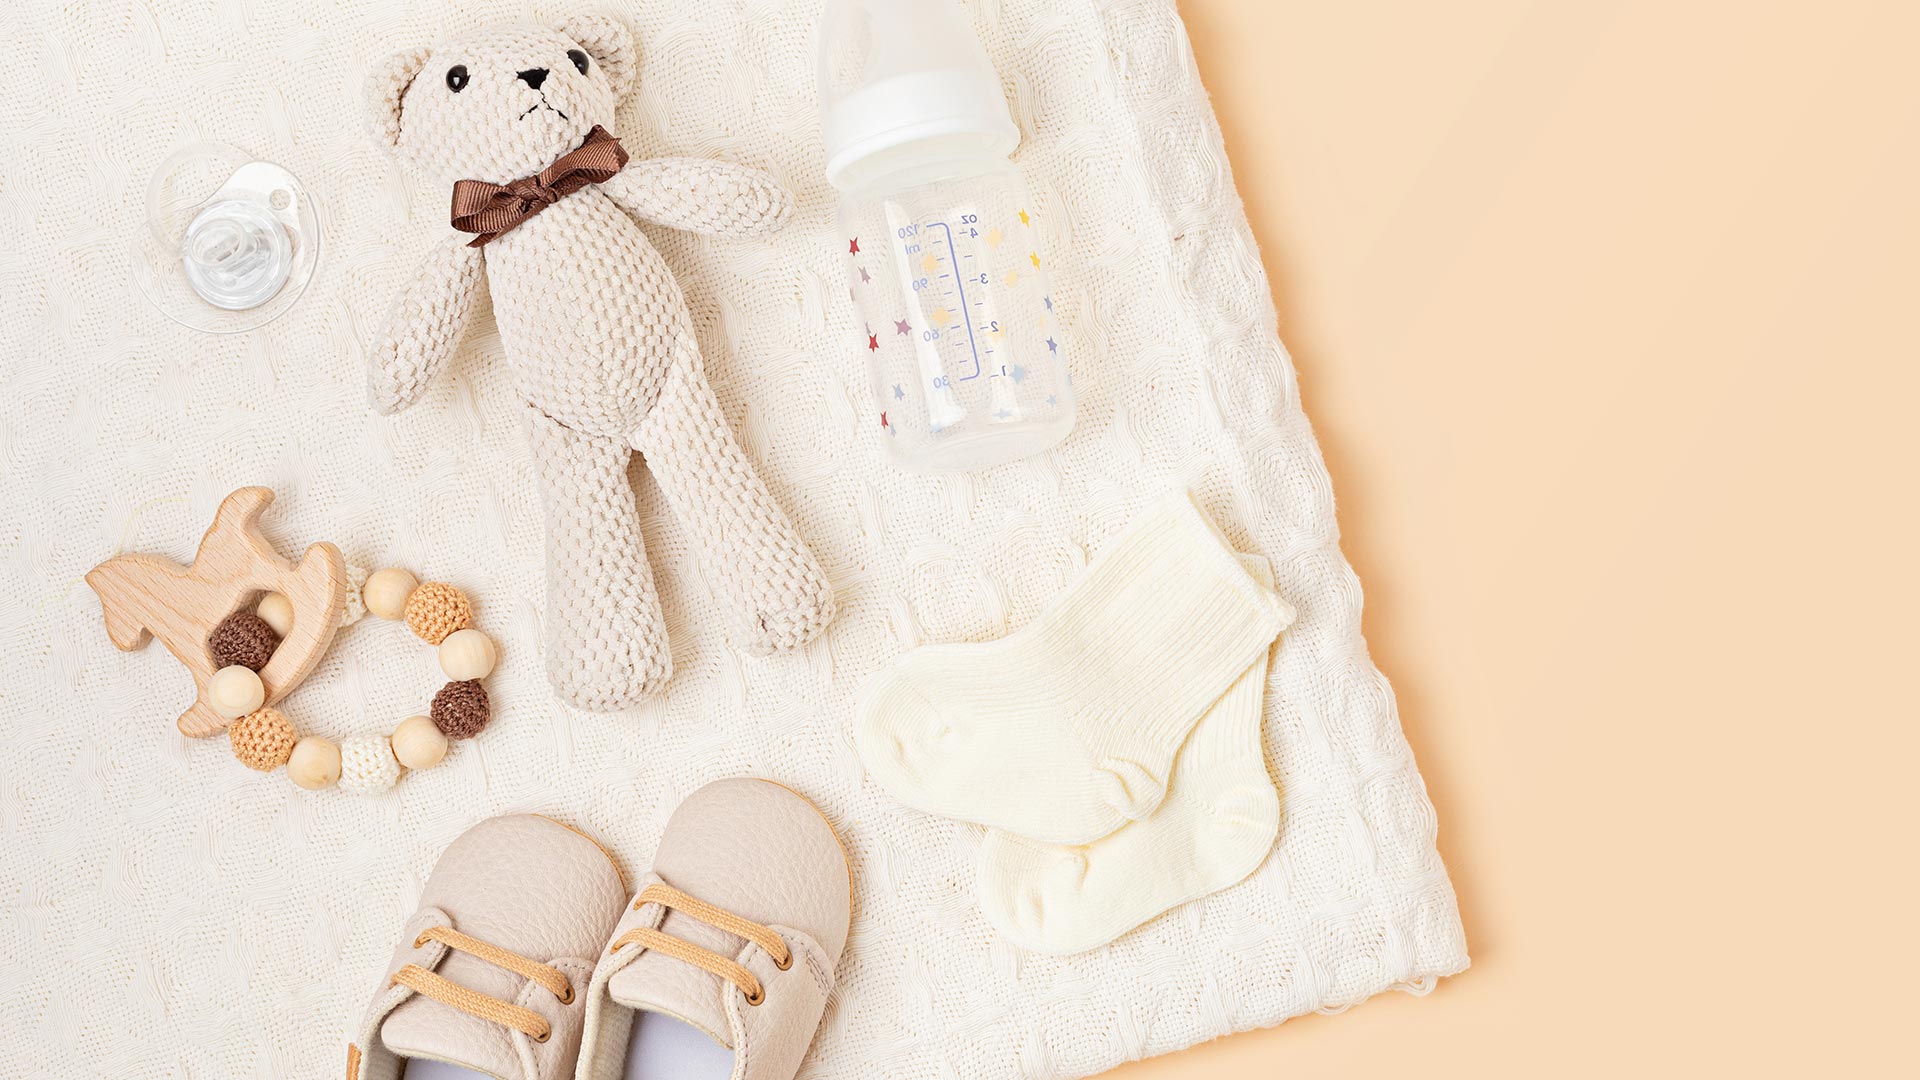 Teddy bear, baby bottle, and baby shoes spread out on a blanket